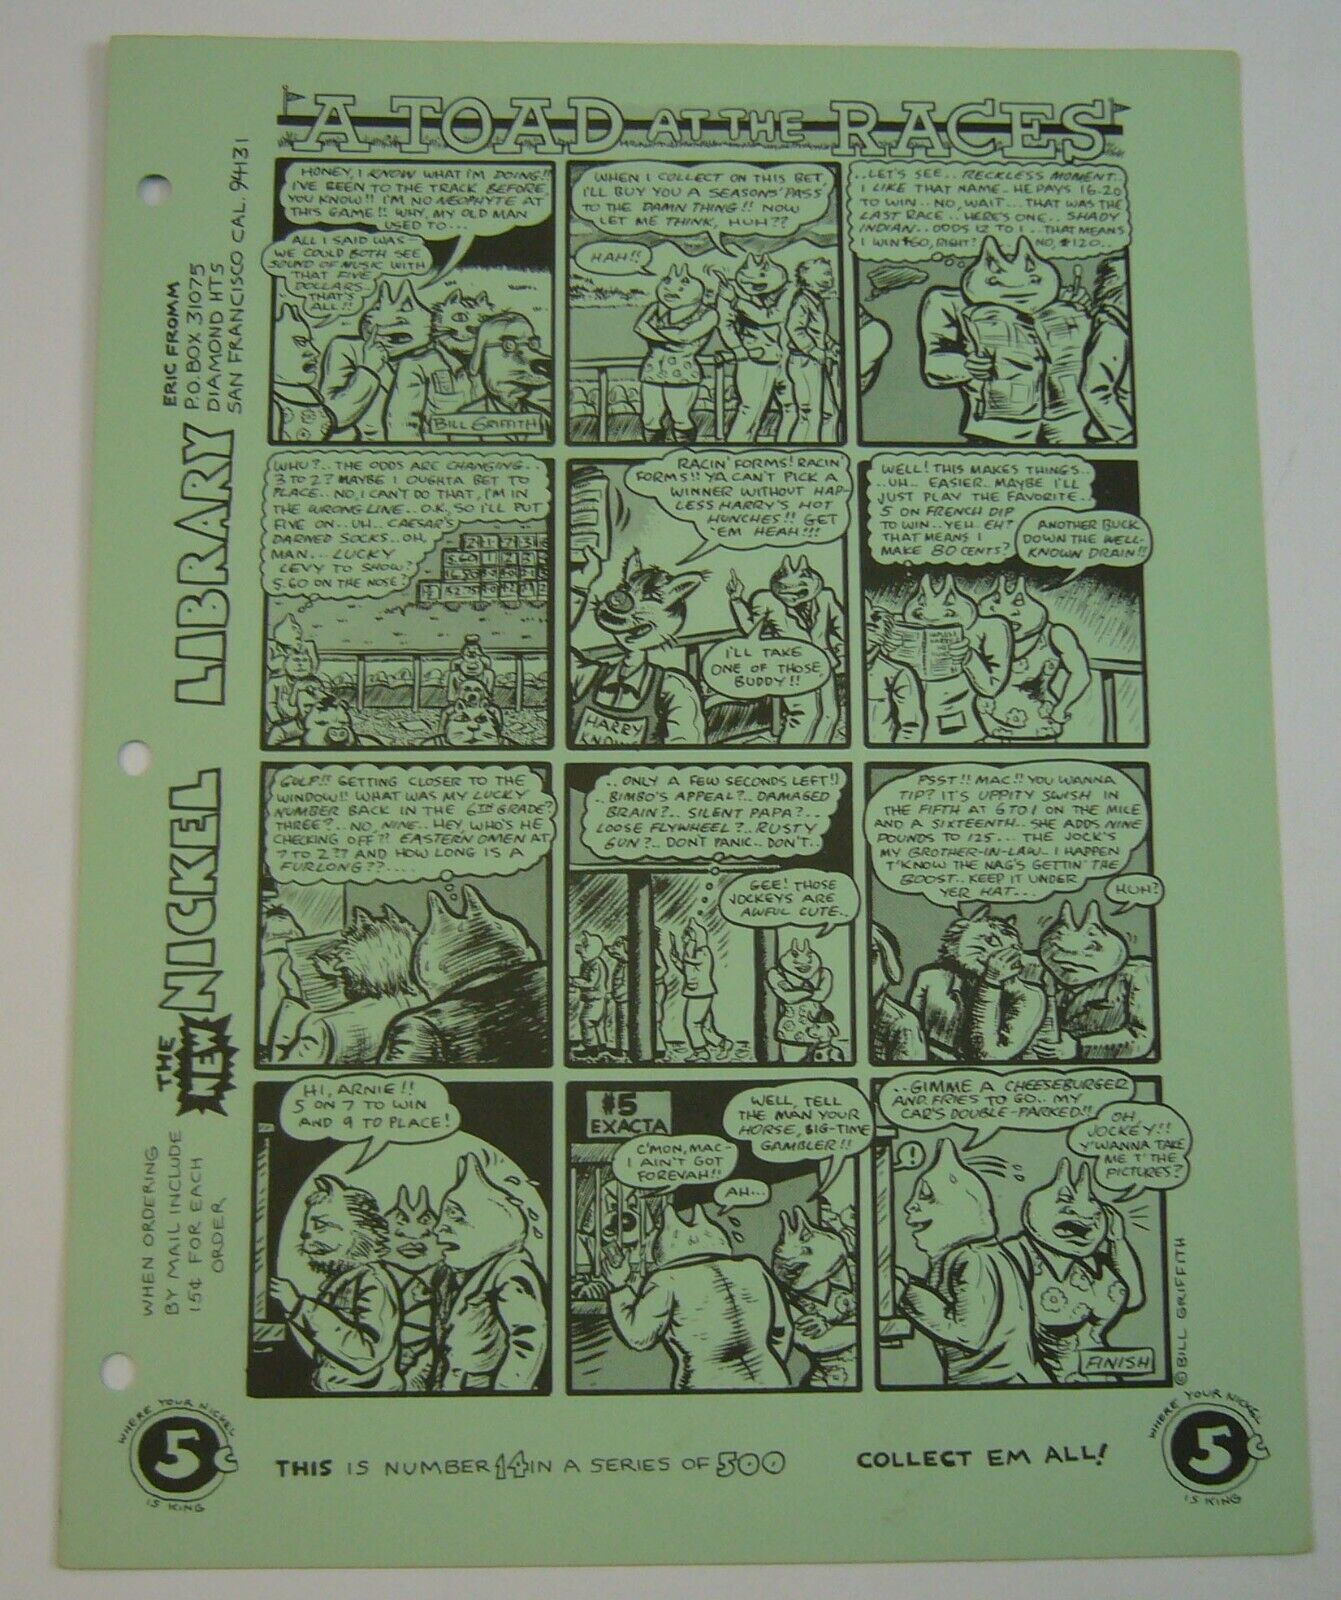 New Nickel Library #14 bill griffith mr. toad underground comix eric fromm